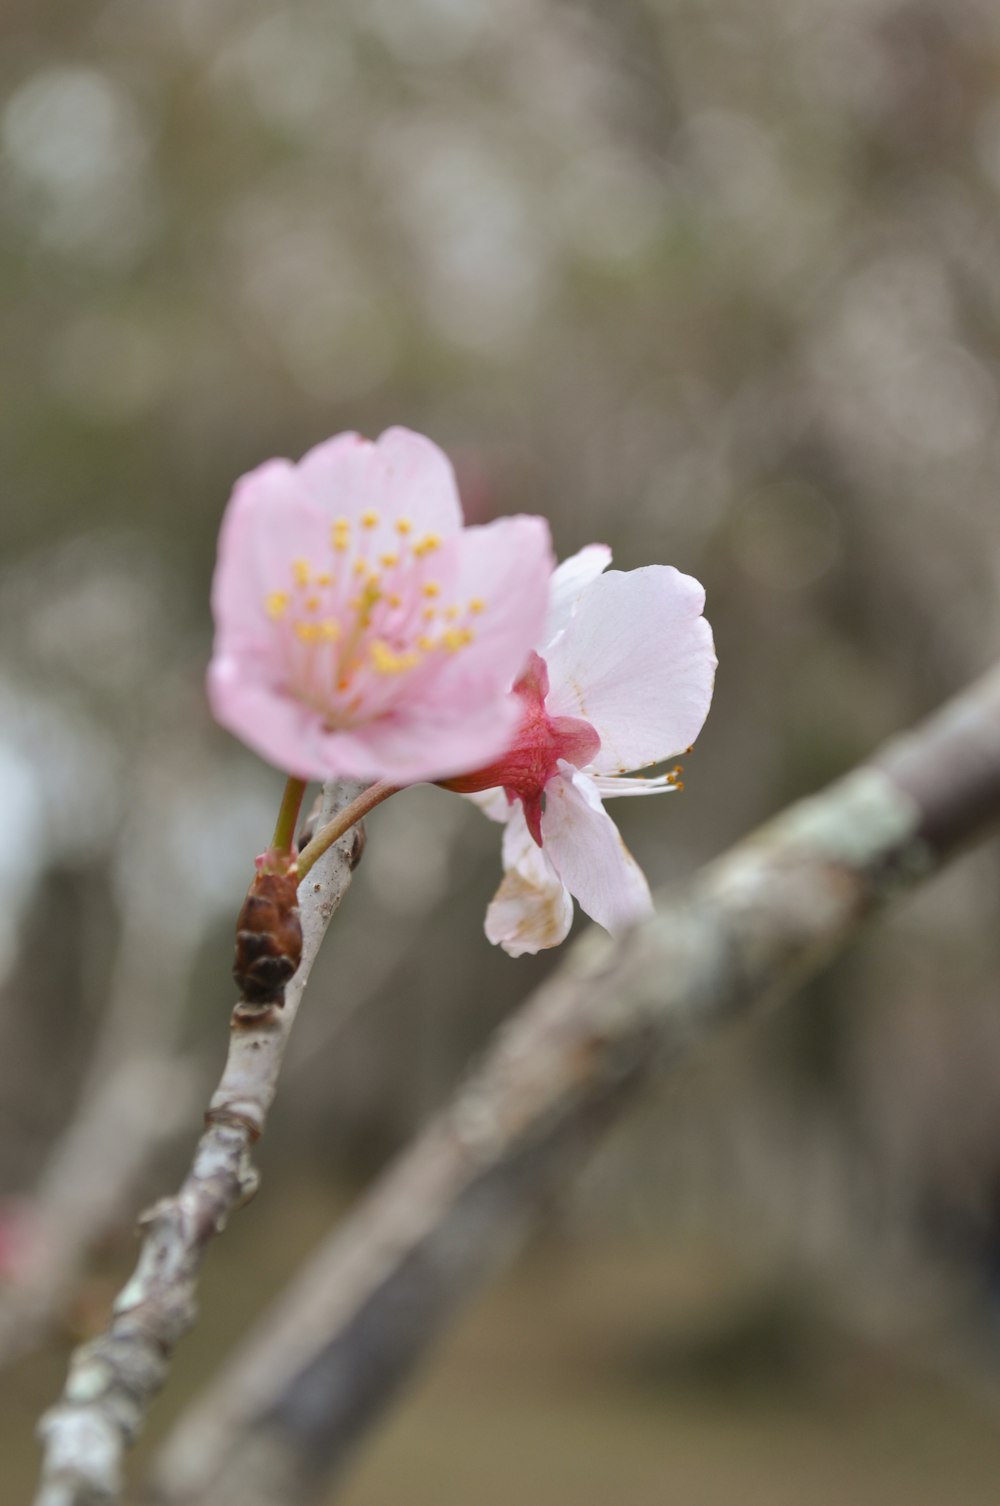 a small pink flower on a tree branch